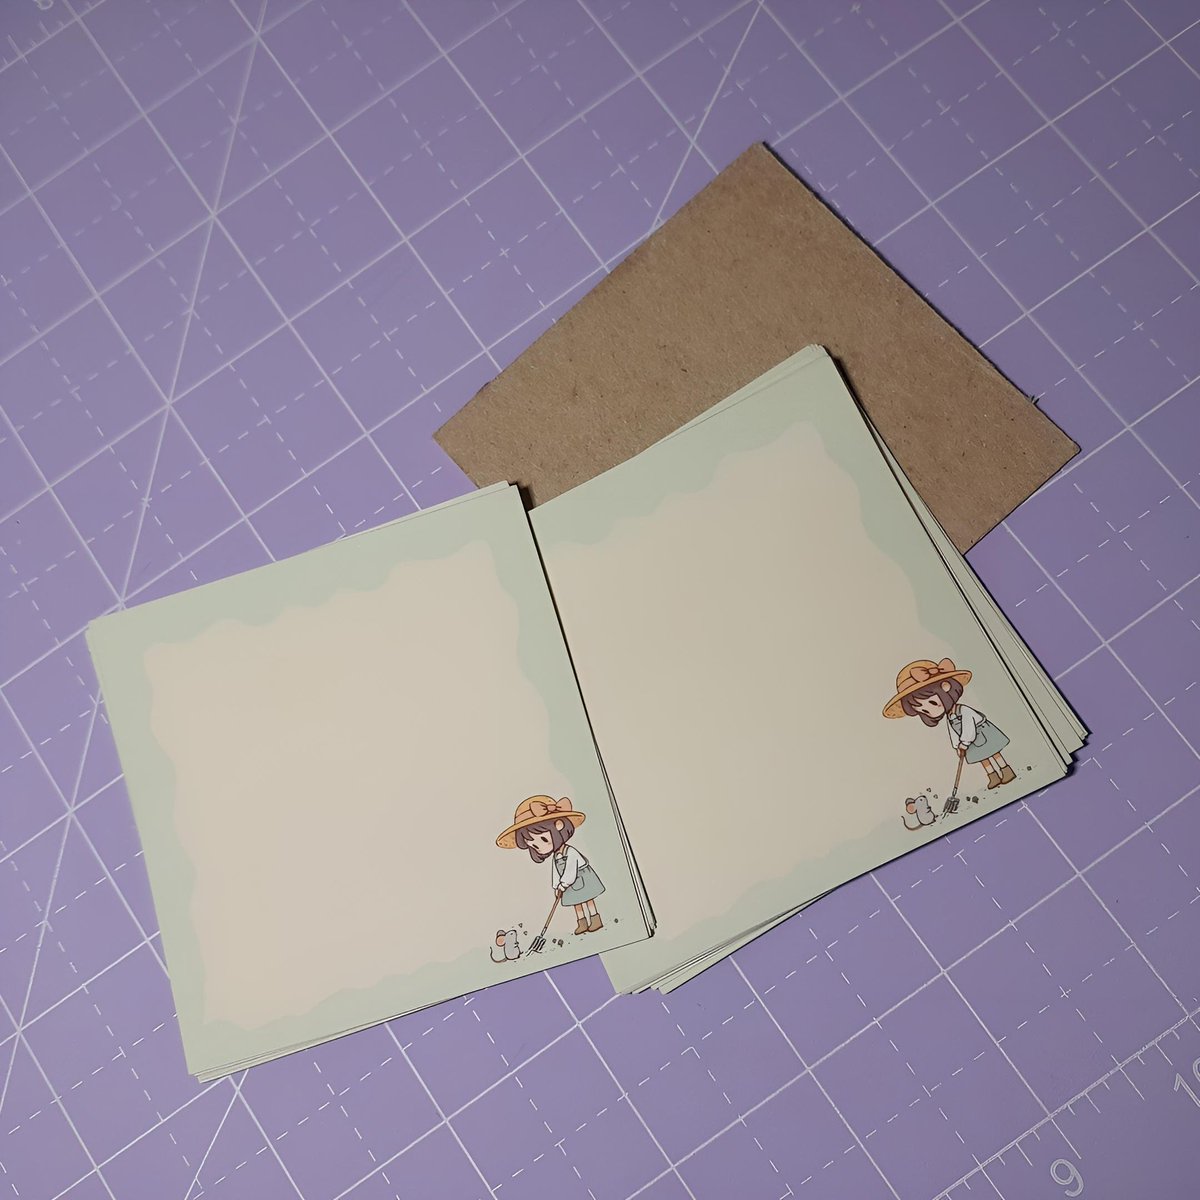 Finally making cute memo pads to add to my storefronts! ♡ ^~^ 
What do you all think about the design? 
The memo pads are going to be 3' x 3' (7.62cm x 7.62cm)
#etsyseller #etsystationery #stationery #stationeryshop #koreanstationery #japanesestationery #kawaiistationery #kawaii